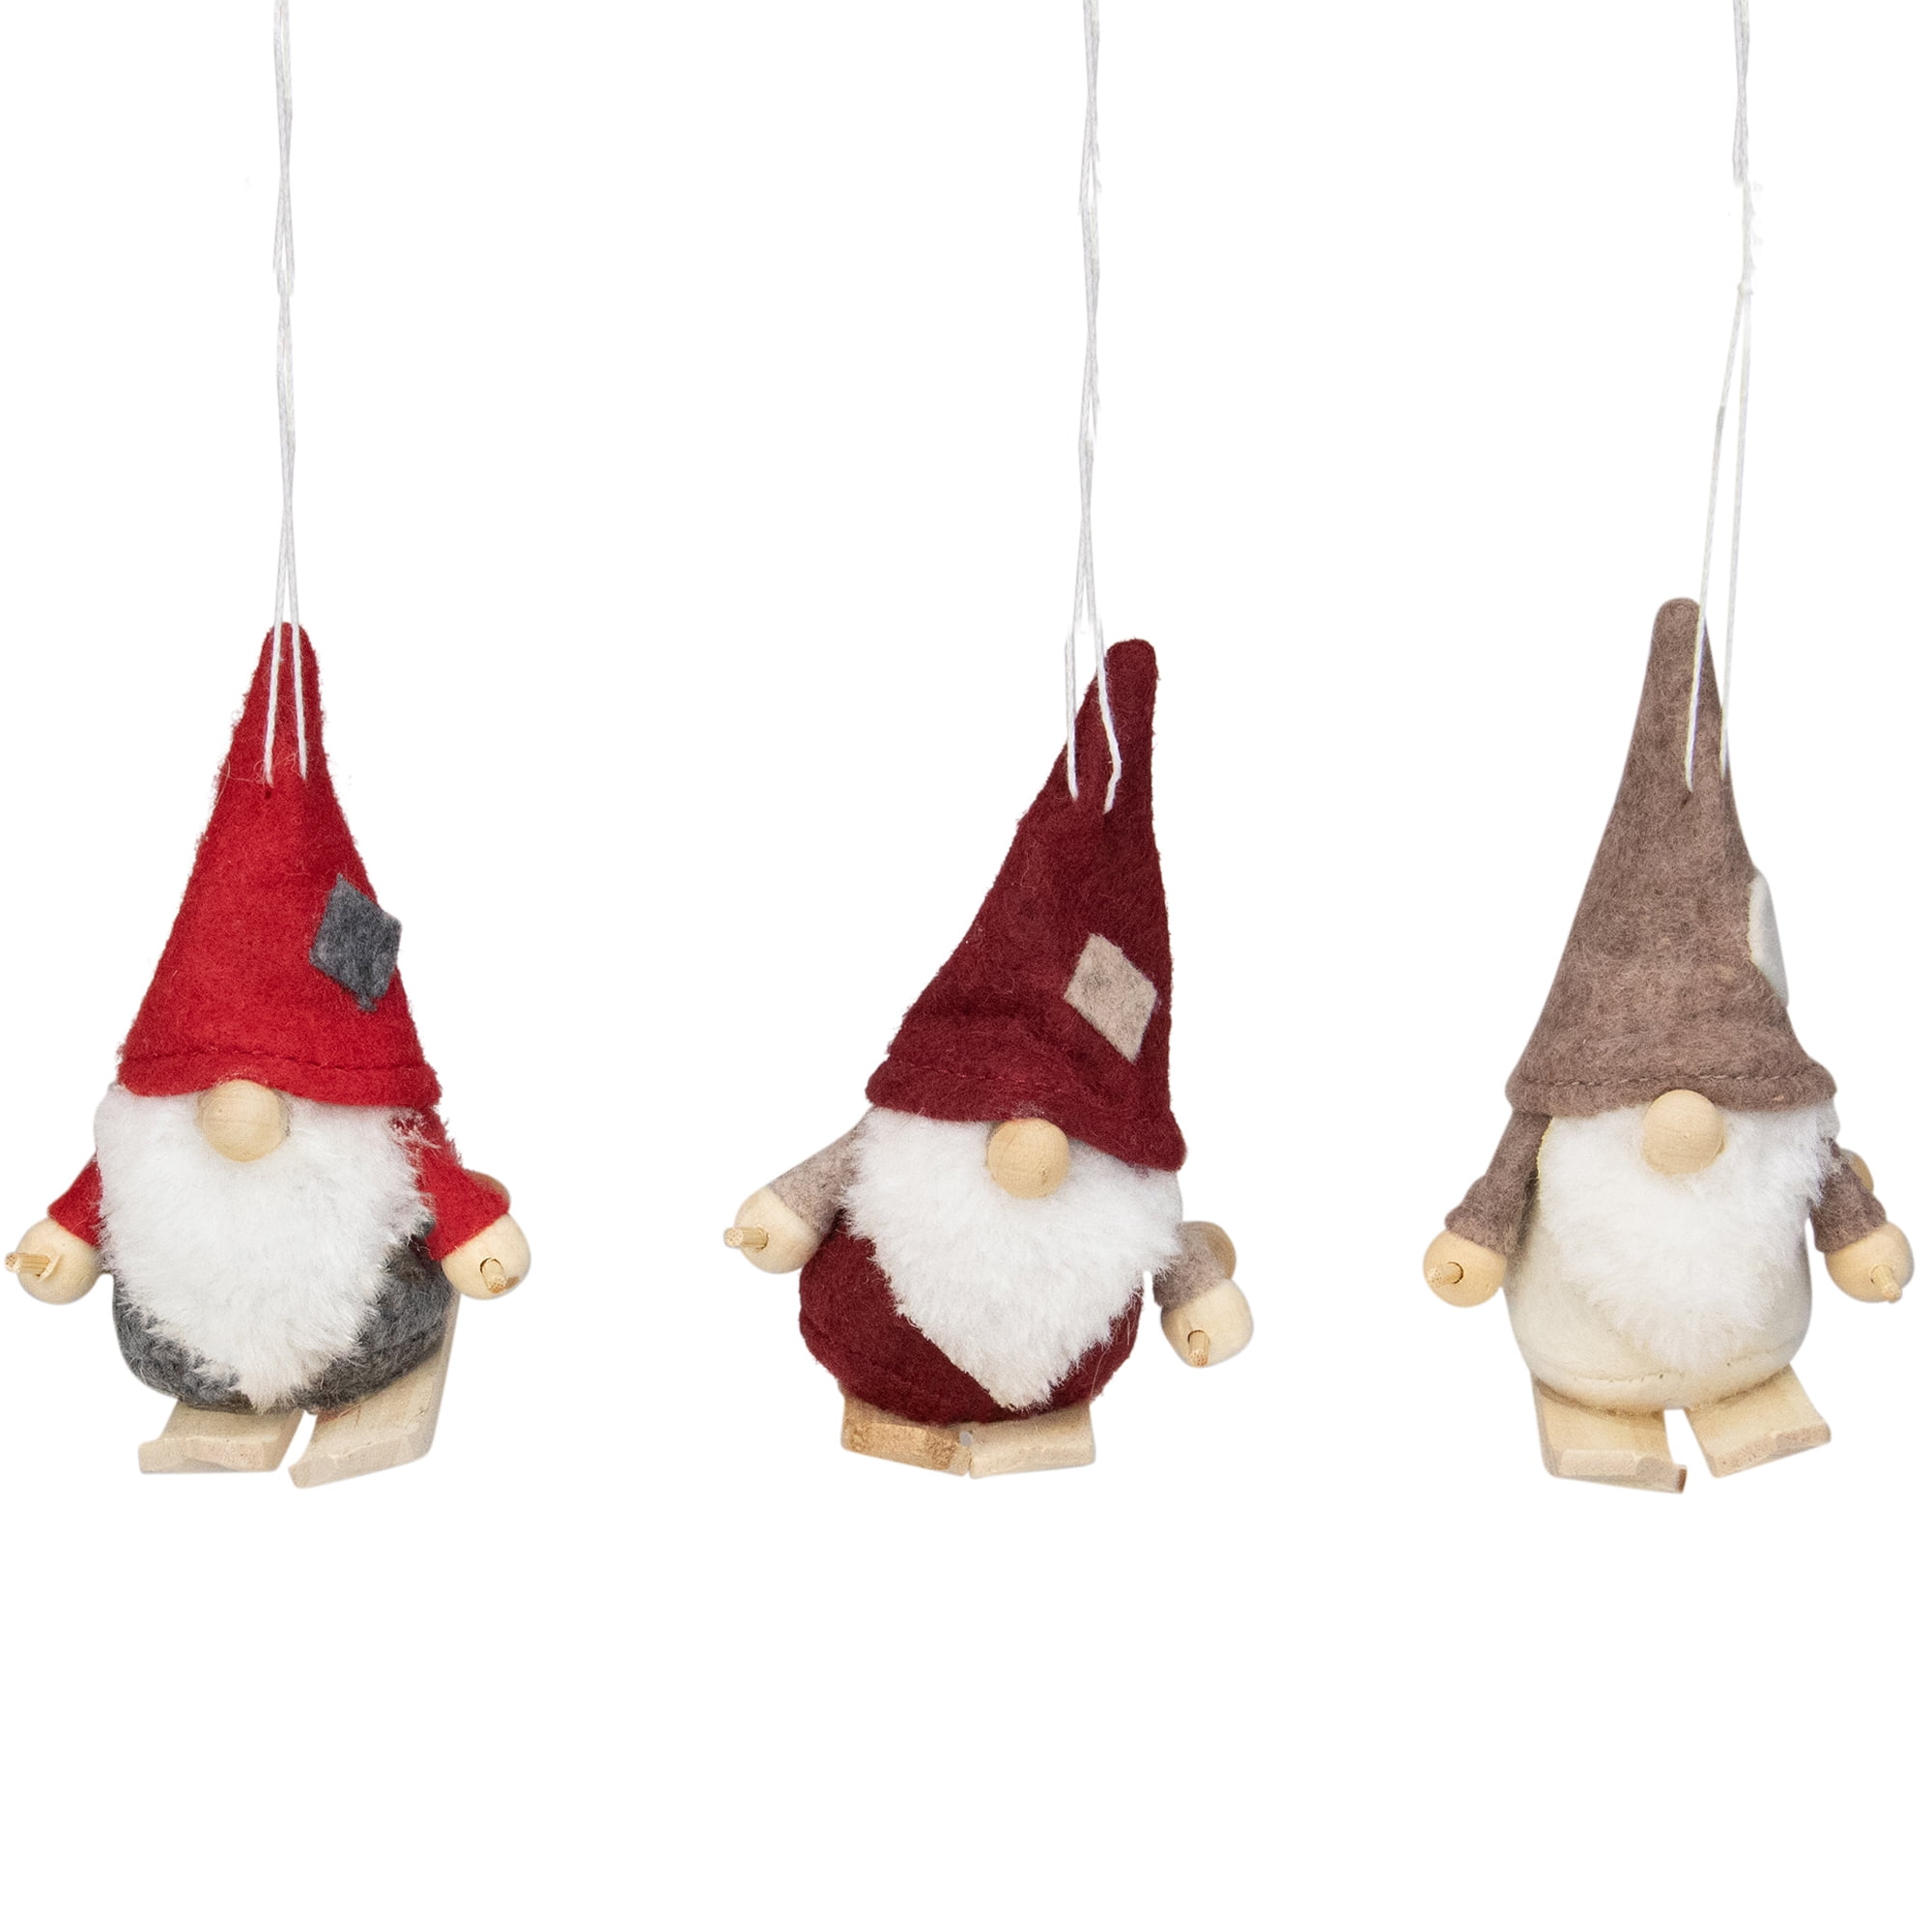 Sparkly turquoise Gnome Christmas Ornaments Scandinavian ornaments